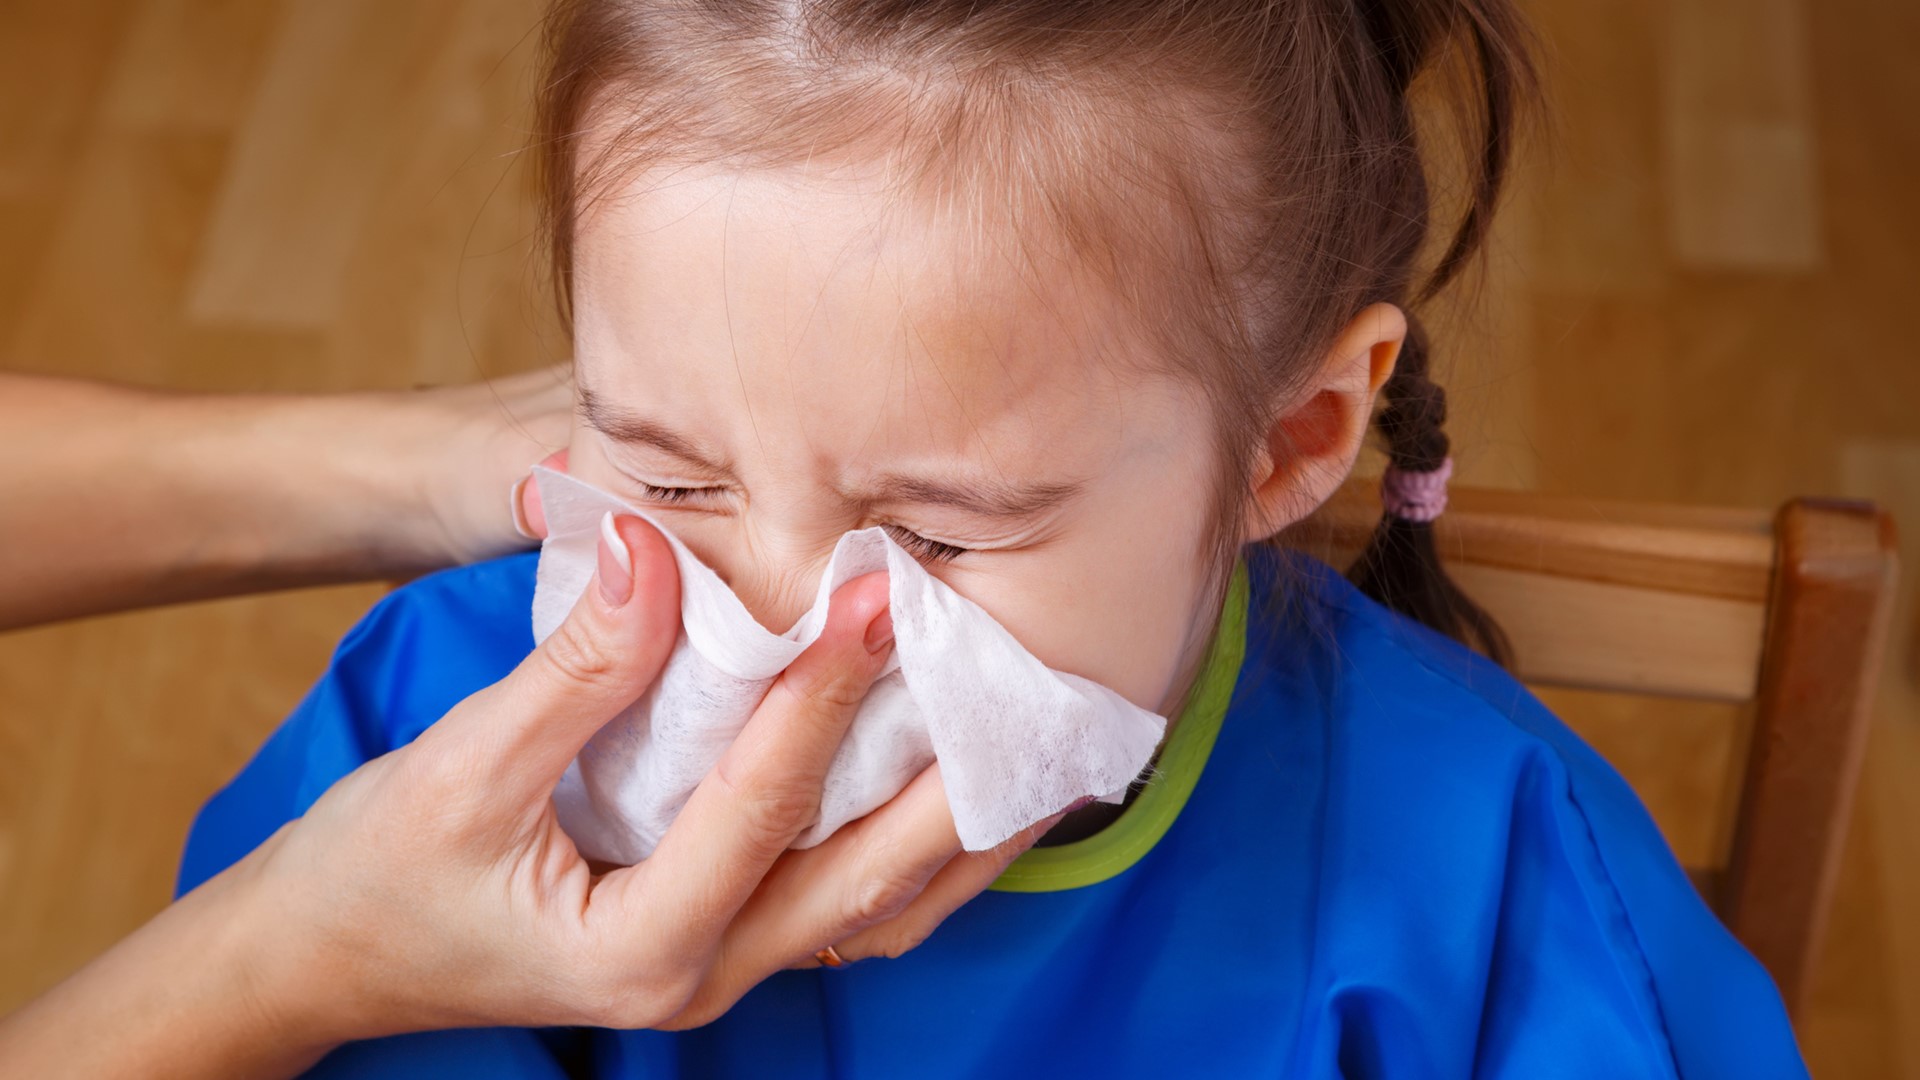 Sudden changes in weather conditions, like temperature and humidity, can cause tissues in your nose to swell, potentially increasing sinus pressure and discomfort.